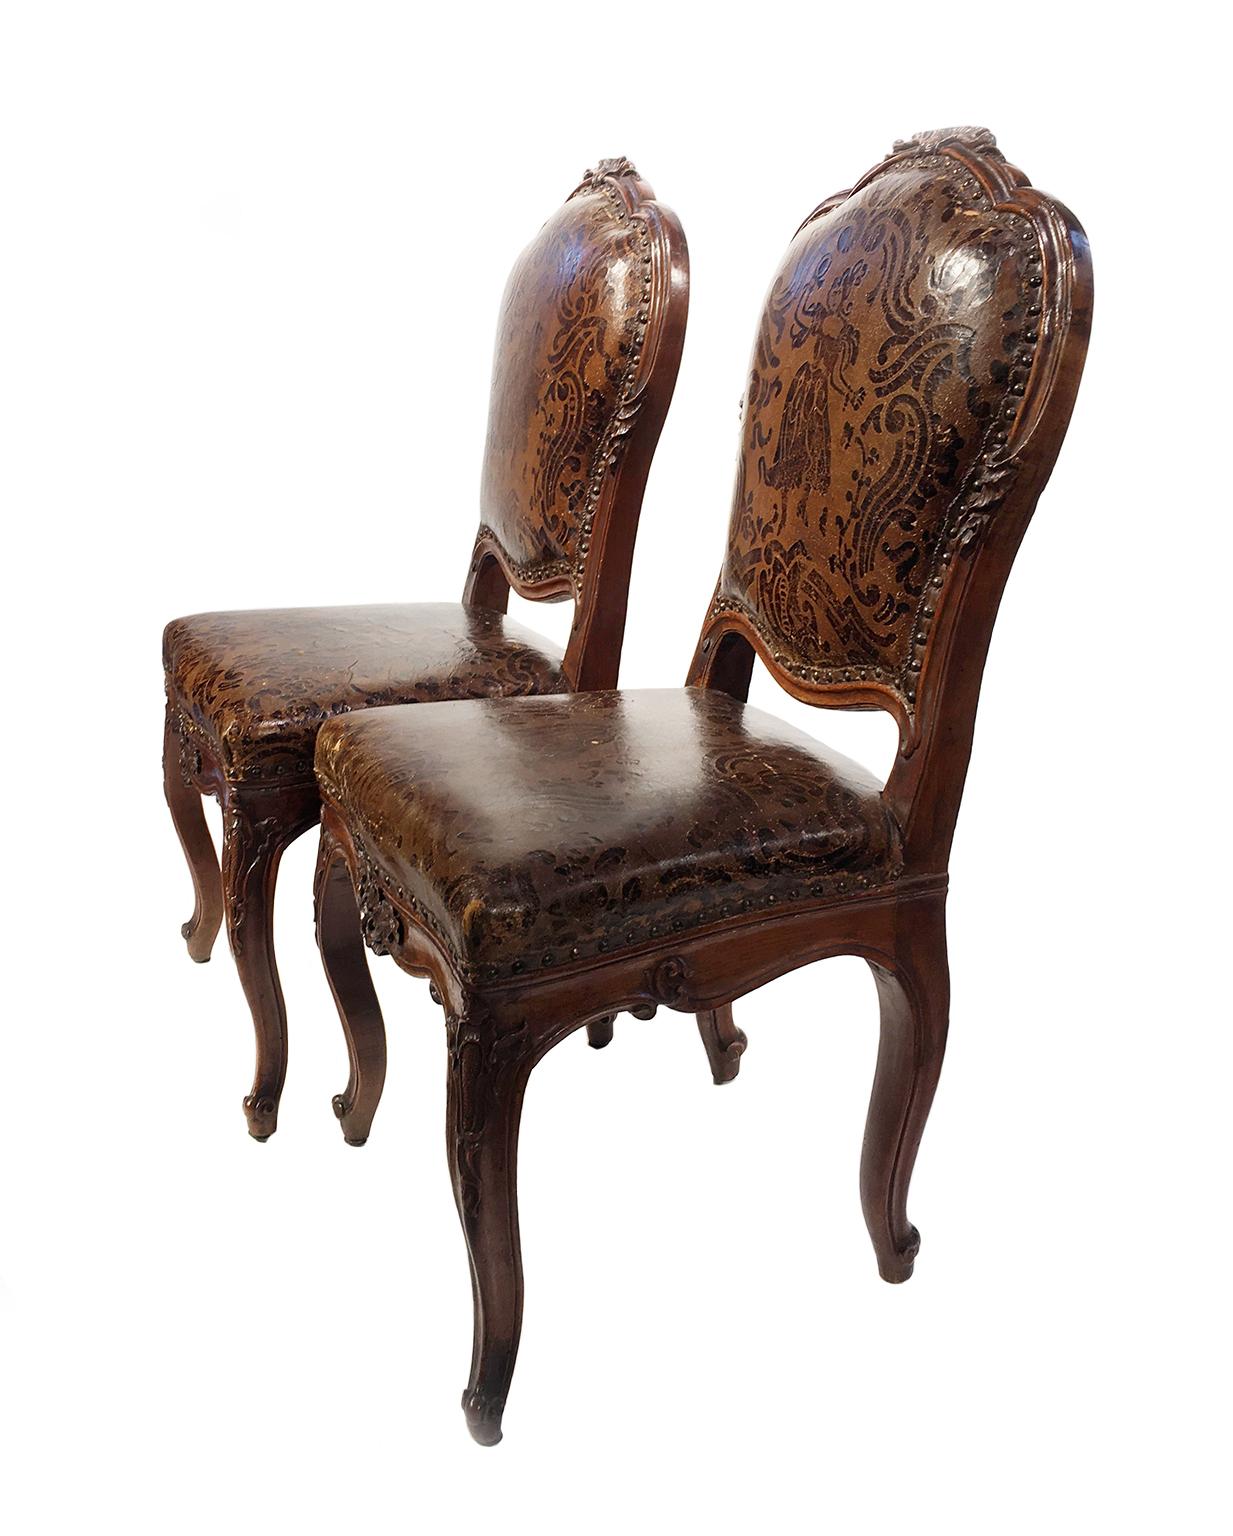 Four carved walnut chairs with leather covers
Milan, circa 1750
They measure: 39.37” high, 18.30” to the seat, 21.65” deep x 19.29”
(100 cm high, 46.5 cm to the seat, 55 cm deep x 49 cm)

State of conservation:
- the leather covers are not